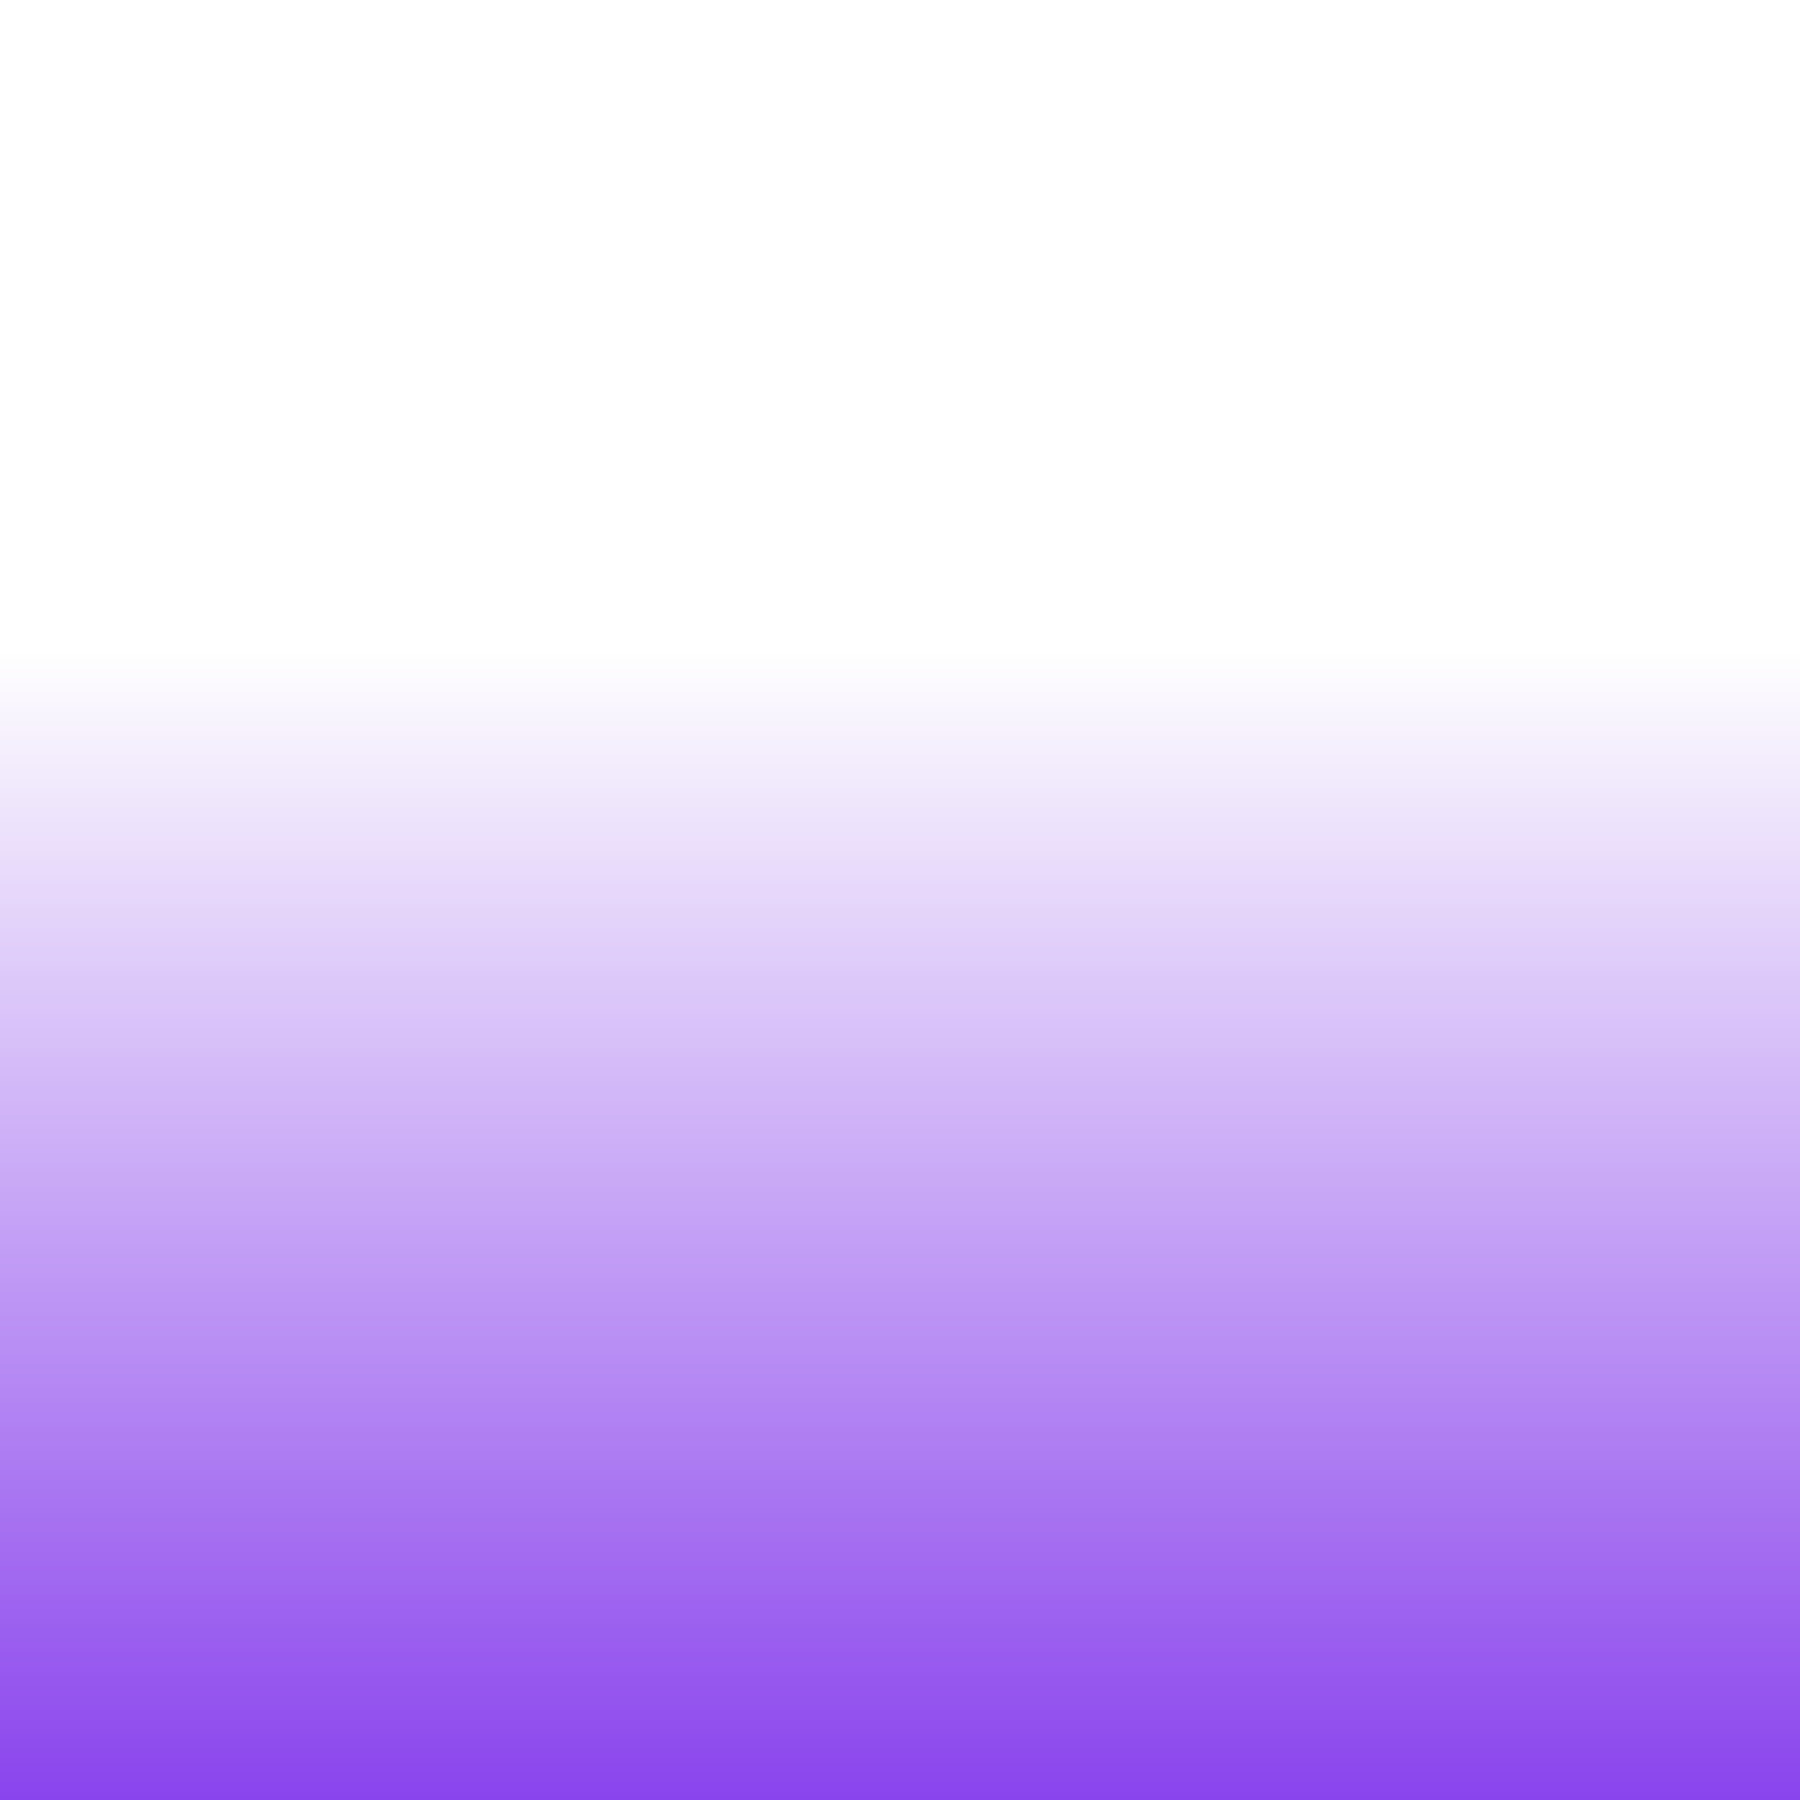 Purple and white color gradient background